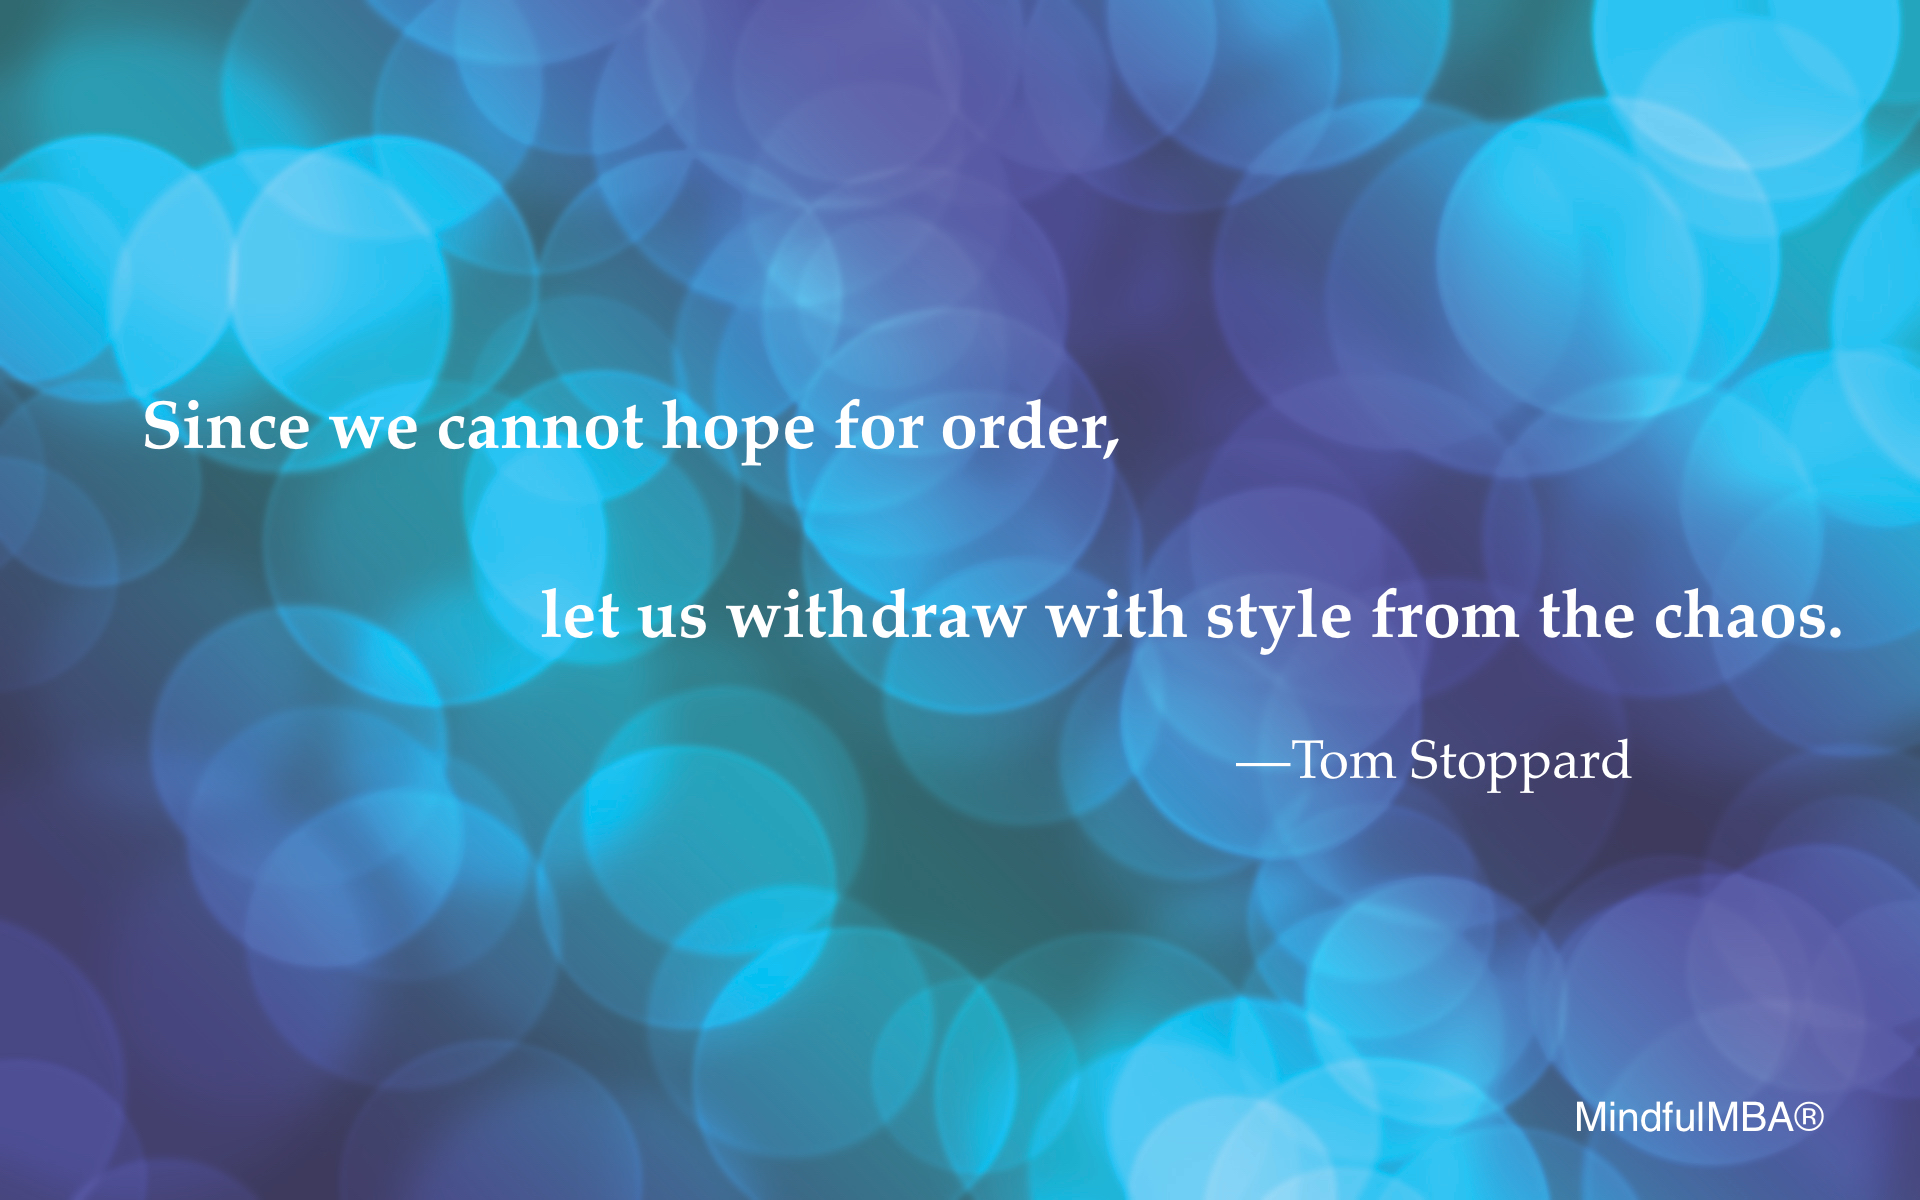 Tom Stoppard Chaos quote w tag